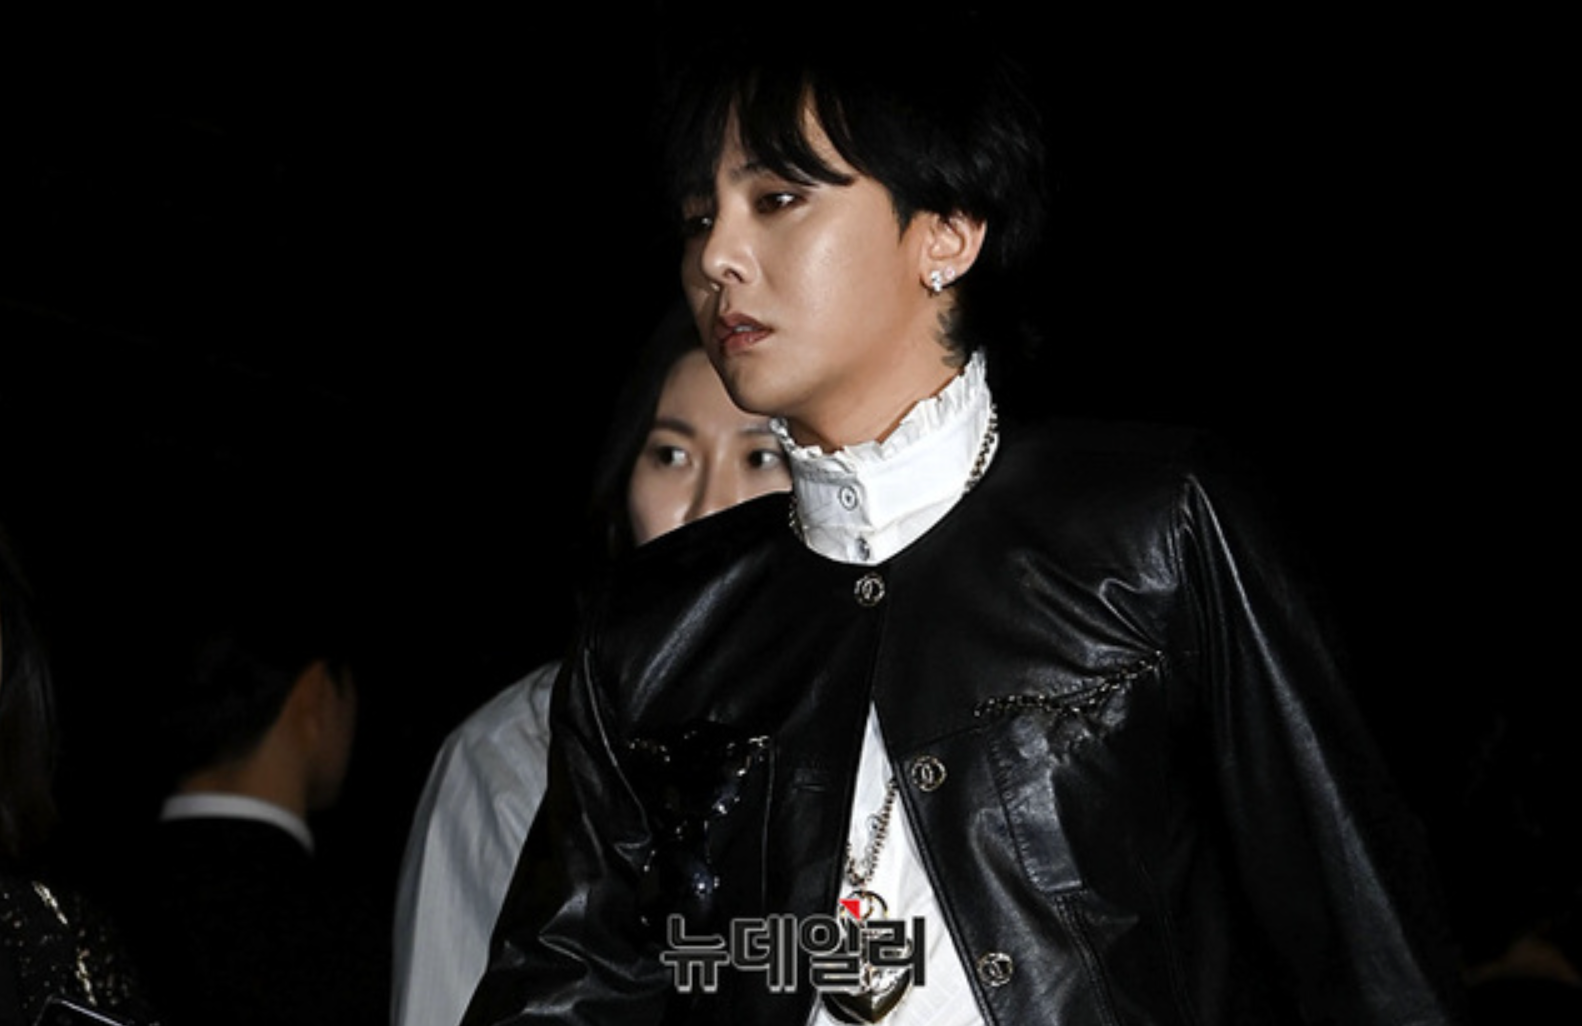 GD under investigation by police for abusing multiple drugs including poppy, opium, coca leaves, and narcotic mixtures